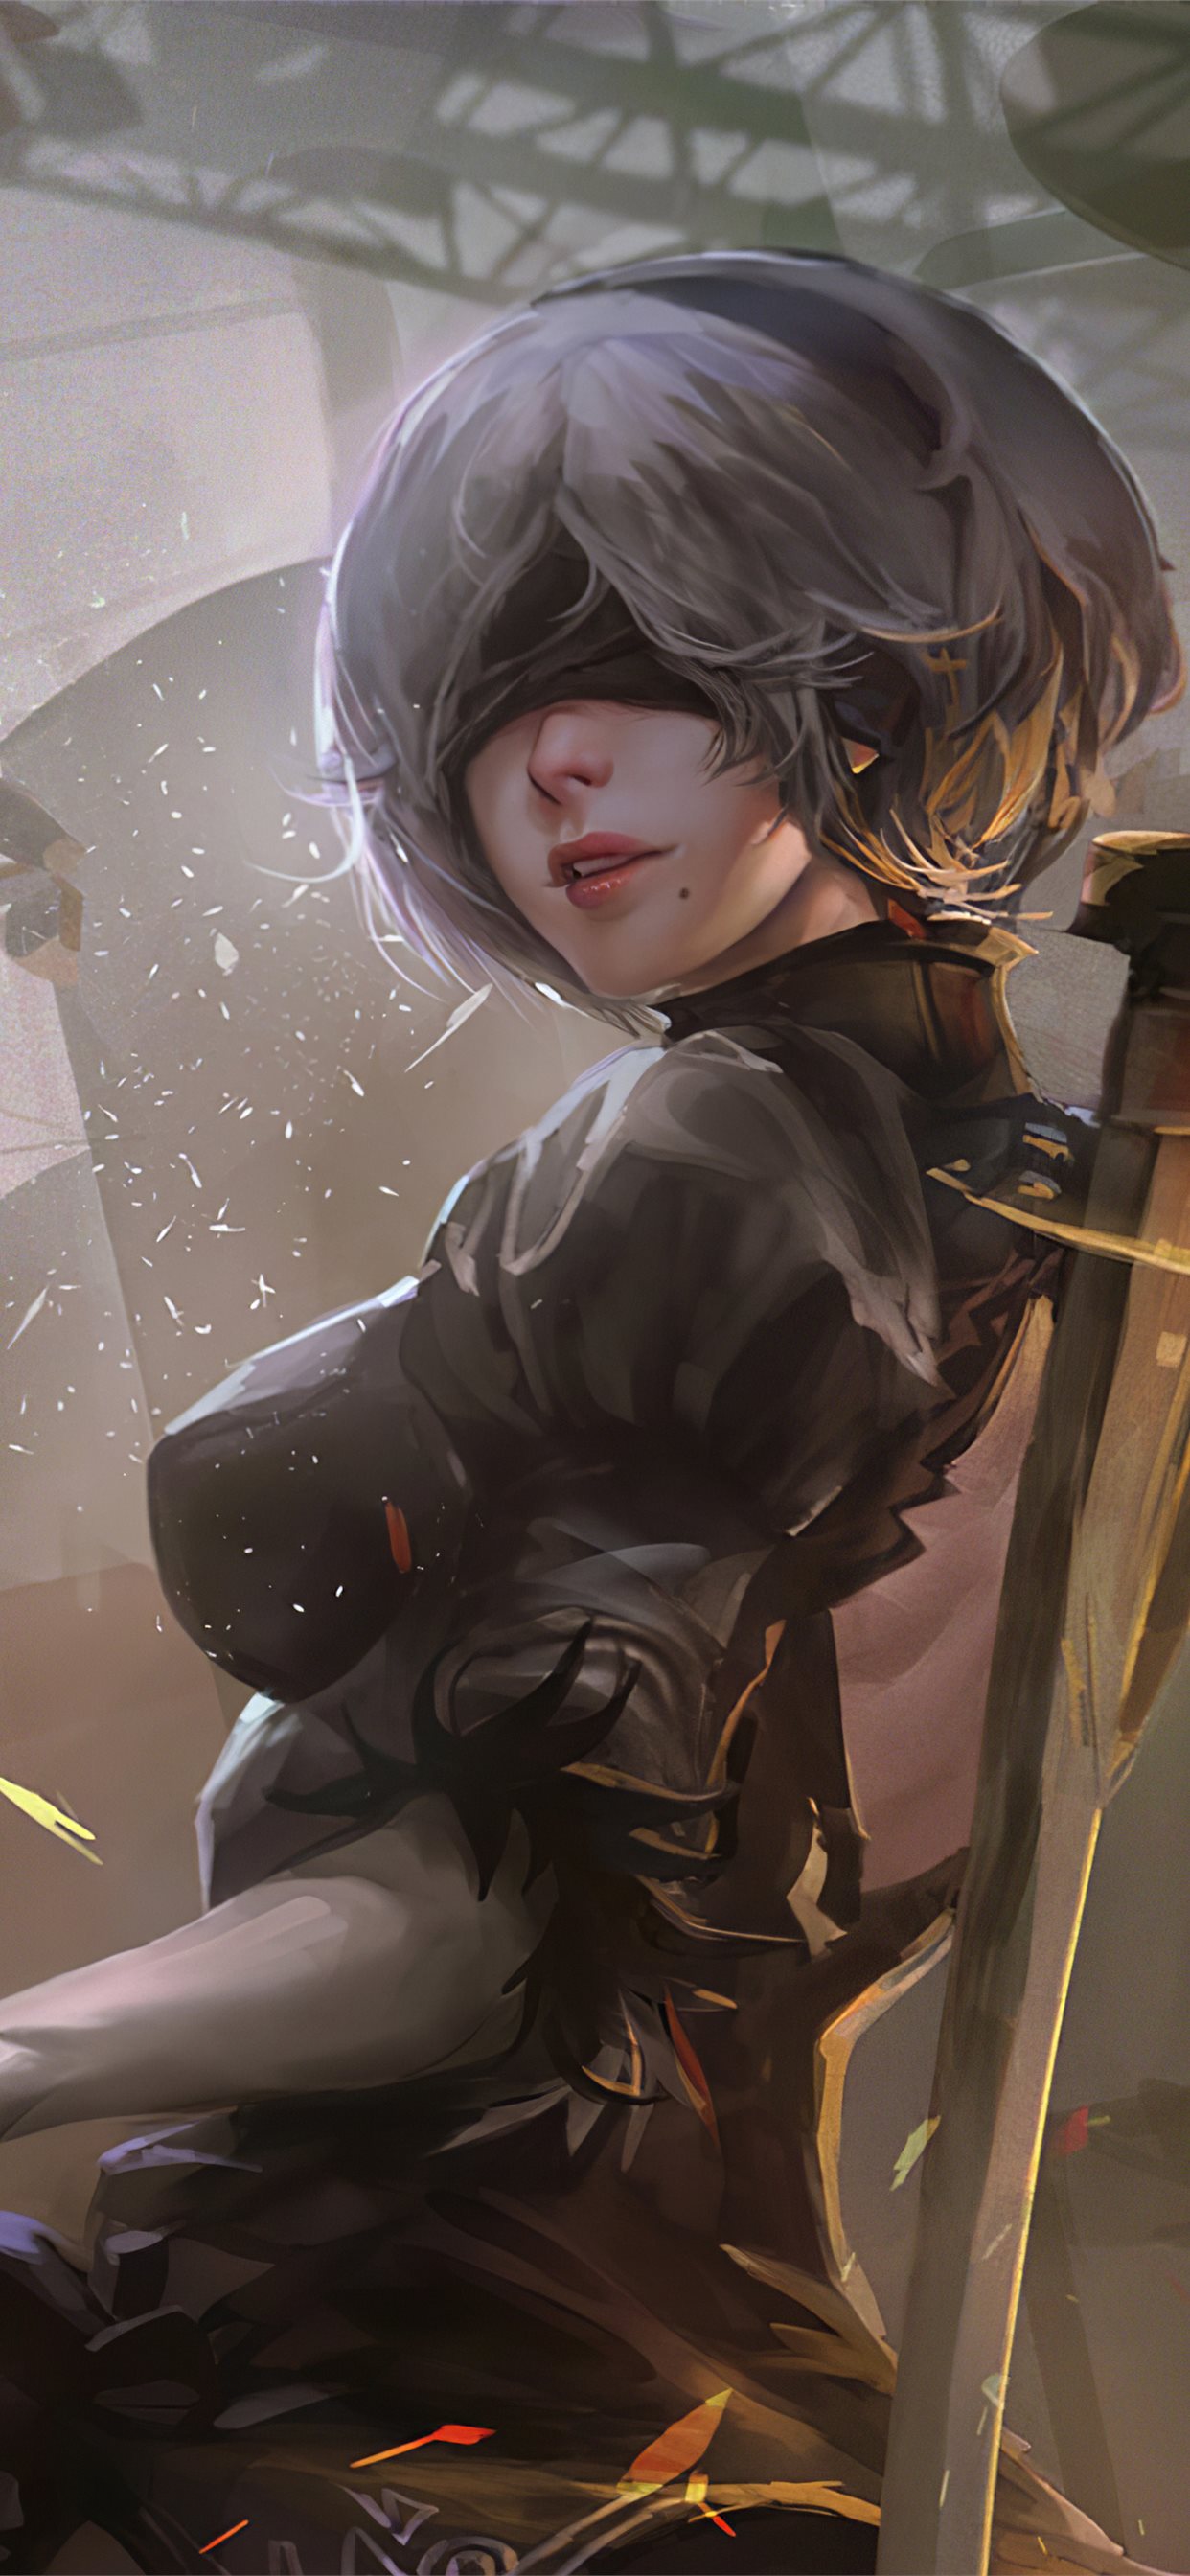 2b Nier Automata 4k Iphone Wallpapers Free Download